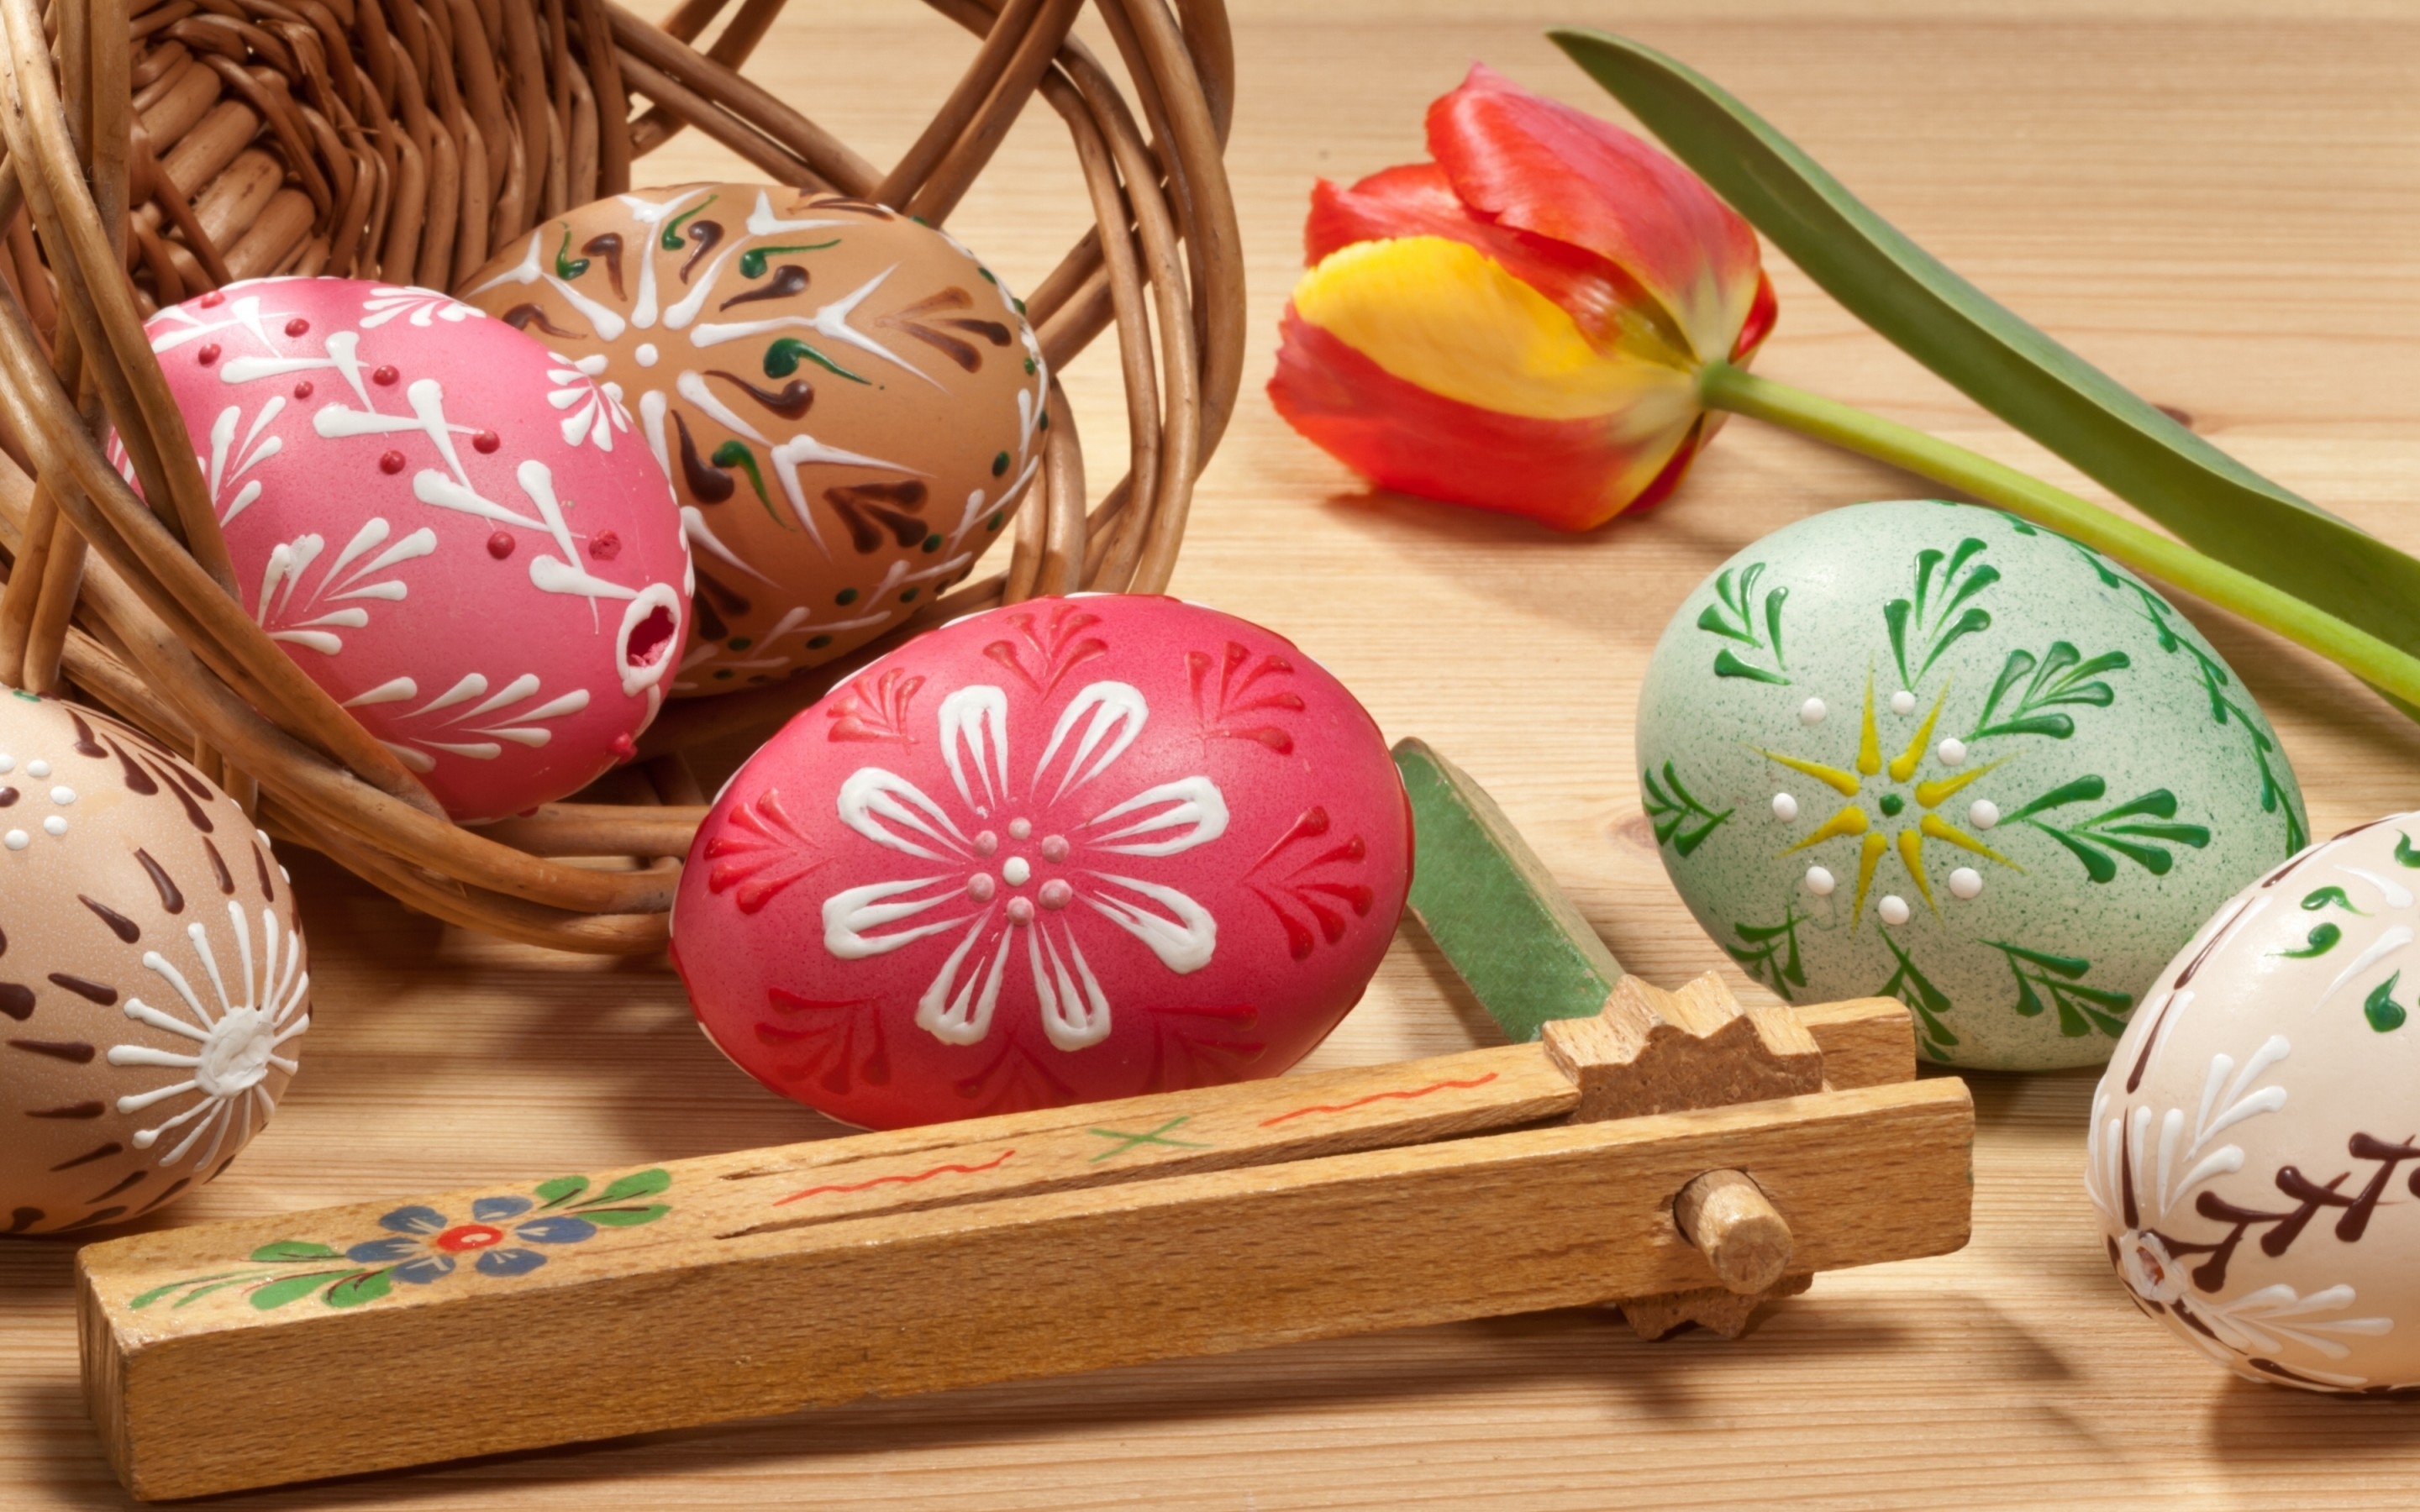 Lovely Painted Easter Eggs for 2880 x 1800 Retina Display resolution